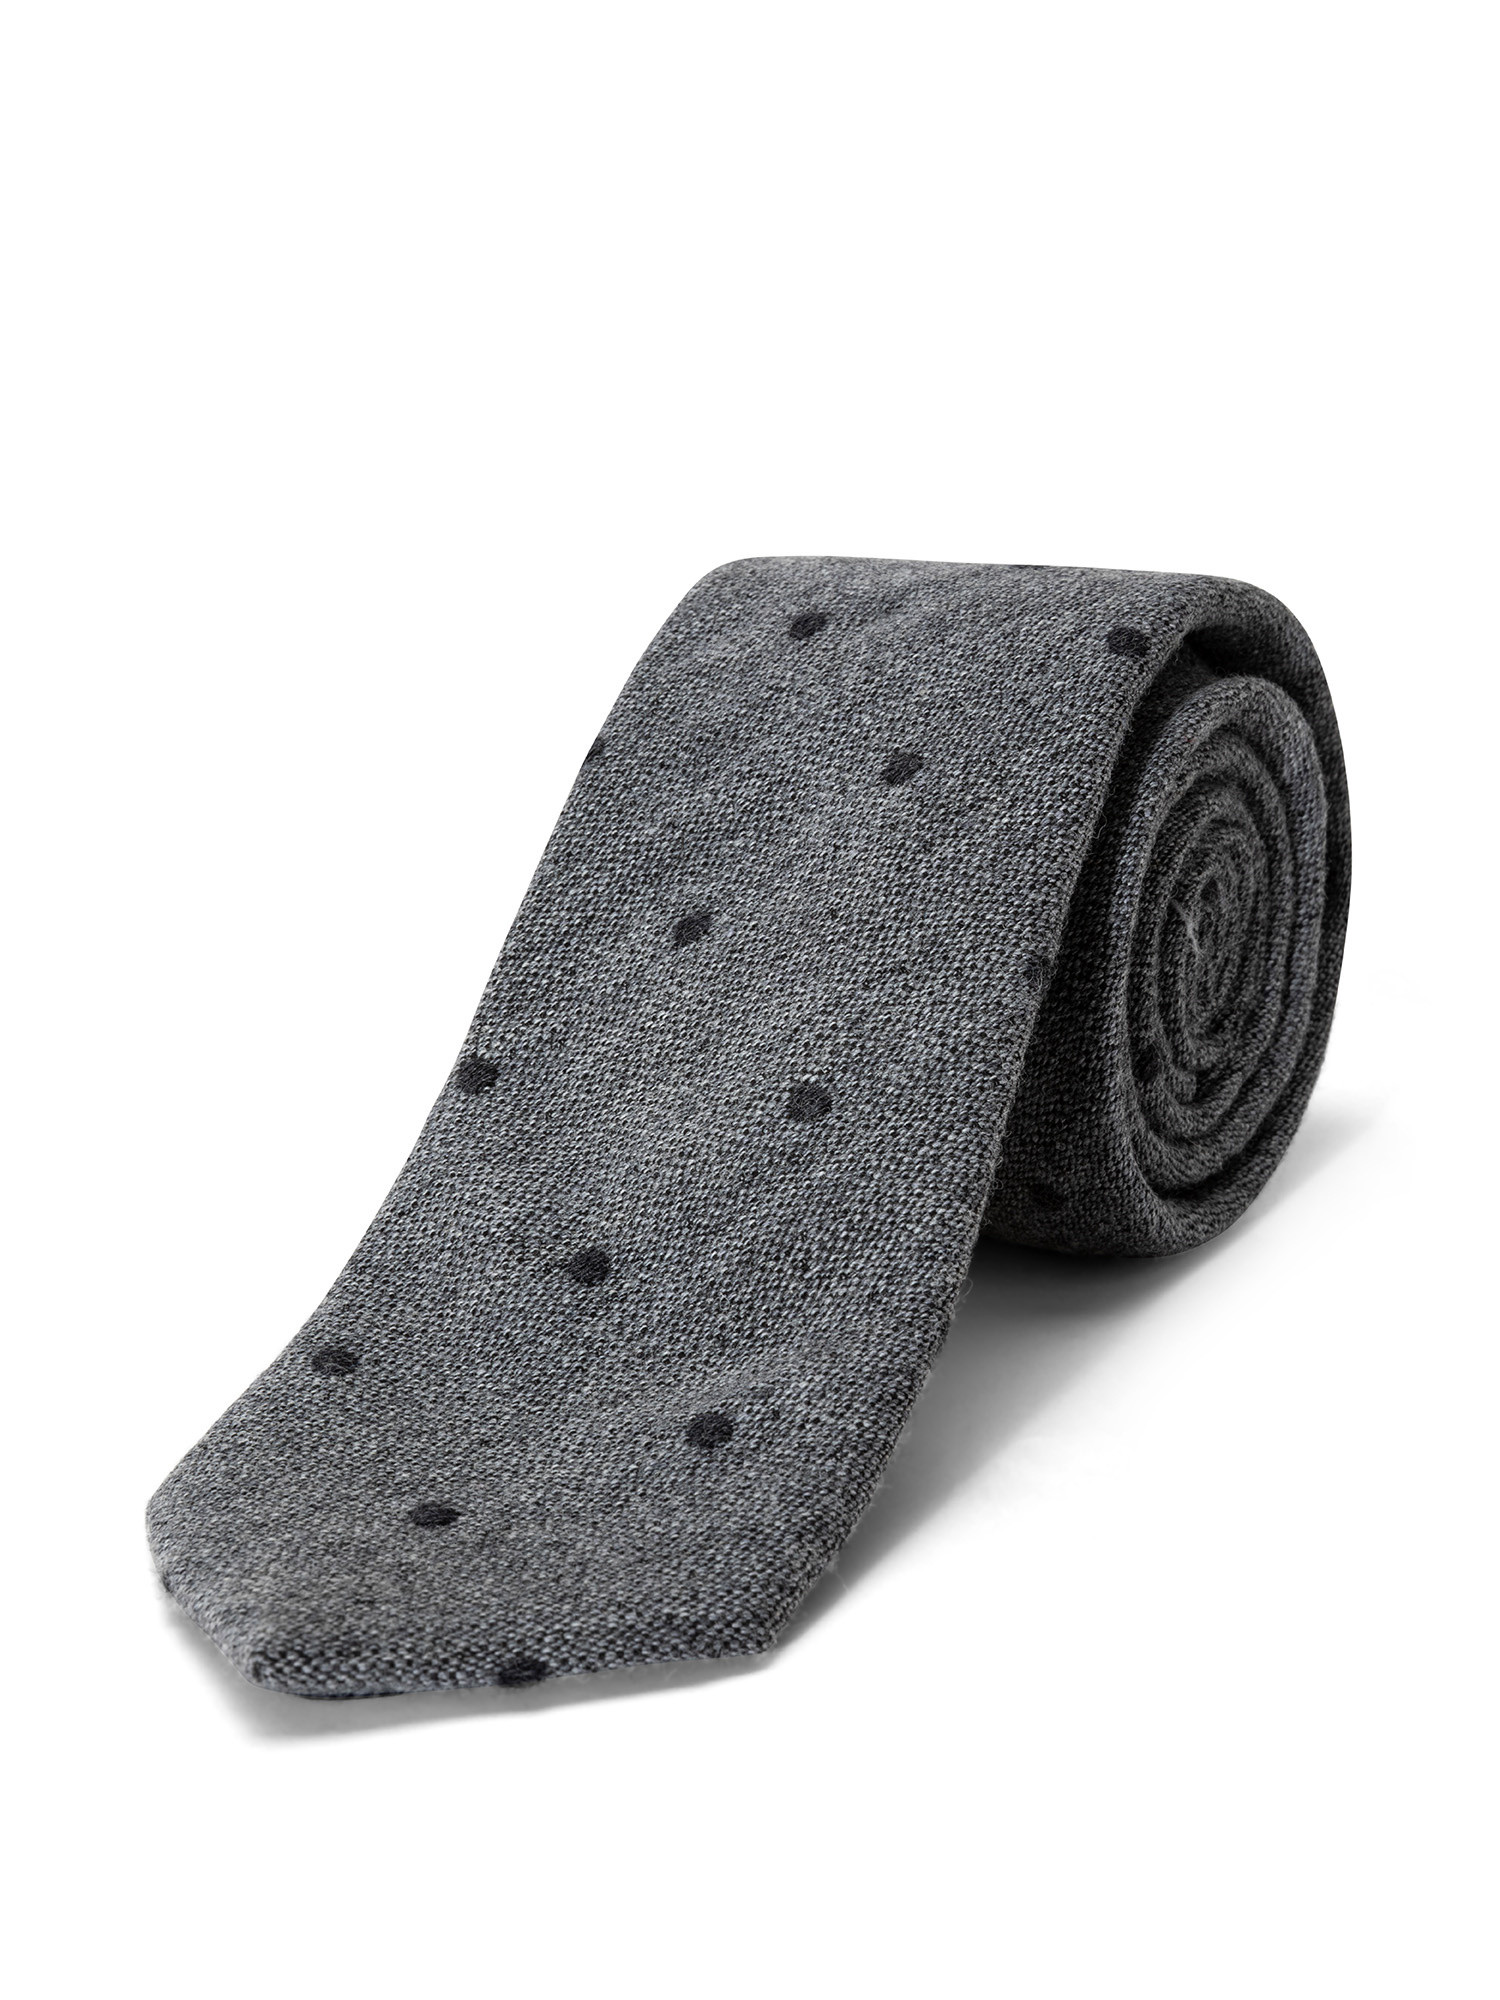 Luca D'Altieri - Patterned wool and silk tie, Grey, large image number 0